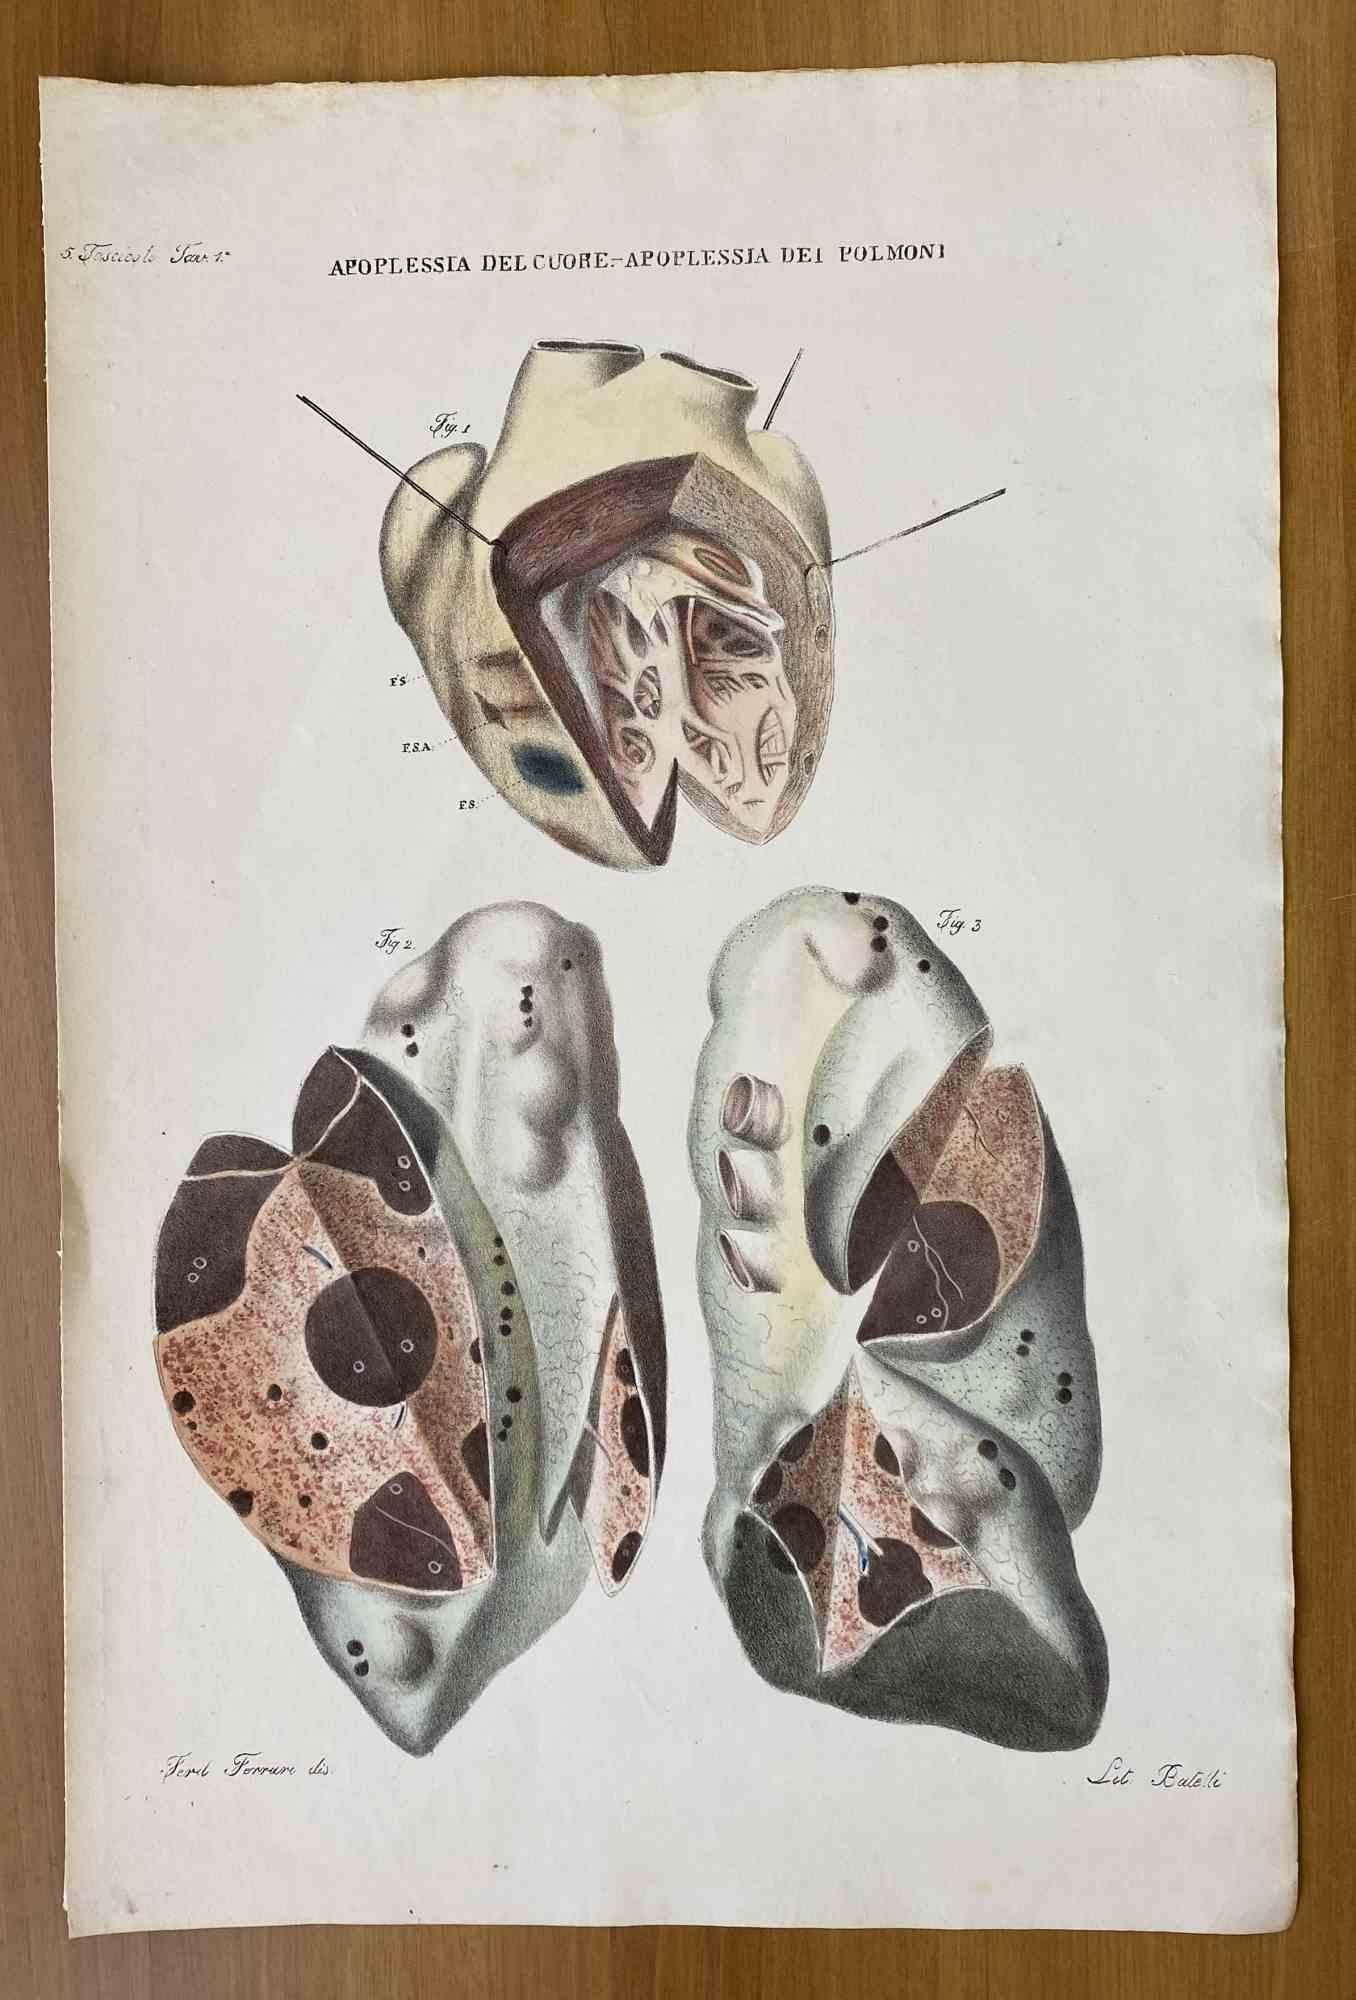 Apoplexy of the Heart and Lungs is a lithograph hand colored by Ottavio Muzzi for the edition of Antoine Chazal, Human Anatomy, Printers Batelli and Ridolfi, 1843.

The work belongs to the Atlante generale della anatomia patologica del corpo umano